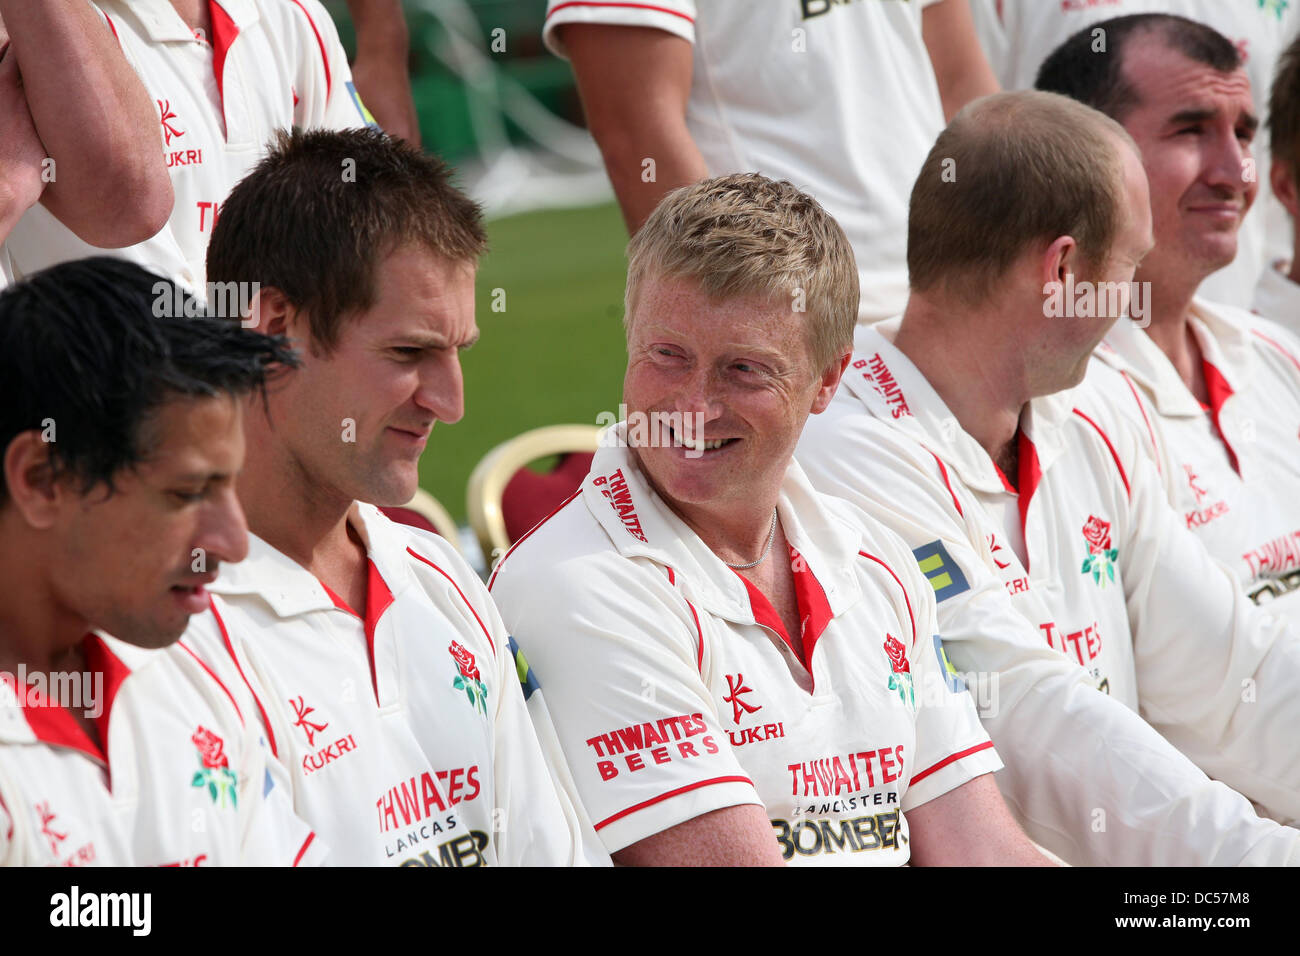 Lancashire County Cricket Club photocall April 6th 2009. Glen Chapple (c) chats with team mates. Stock Photo